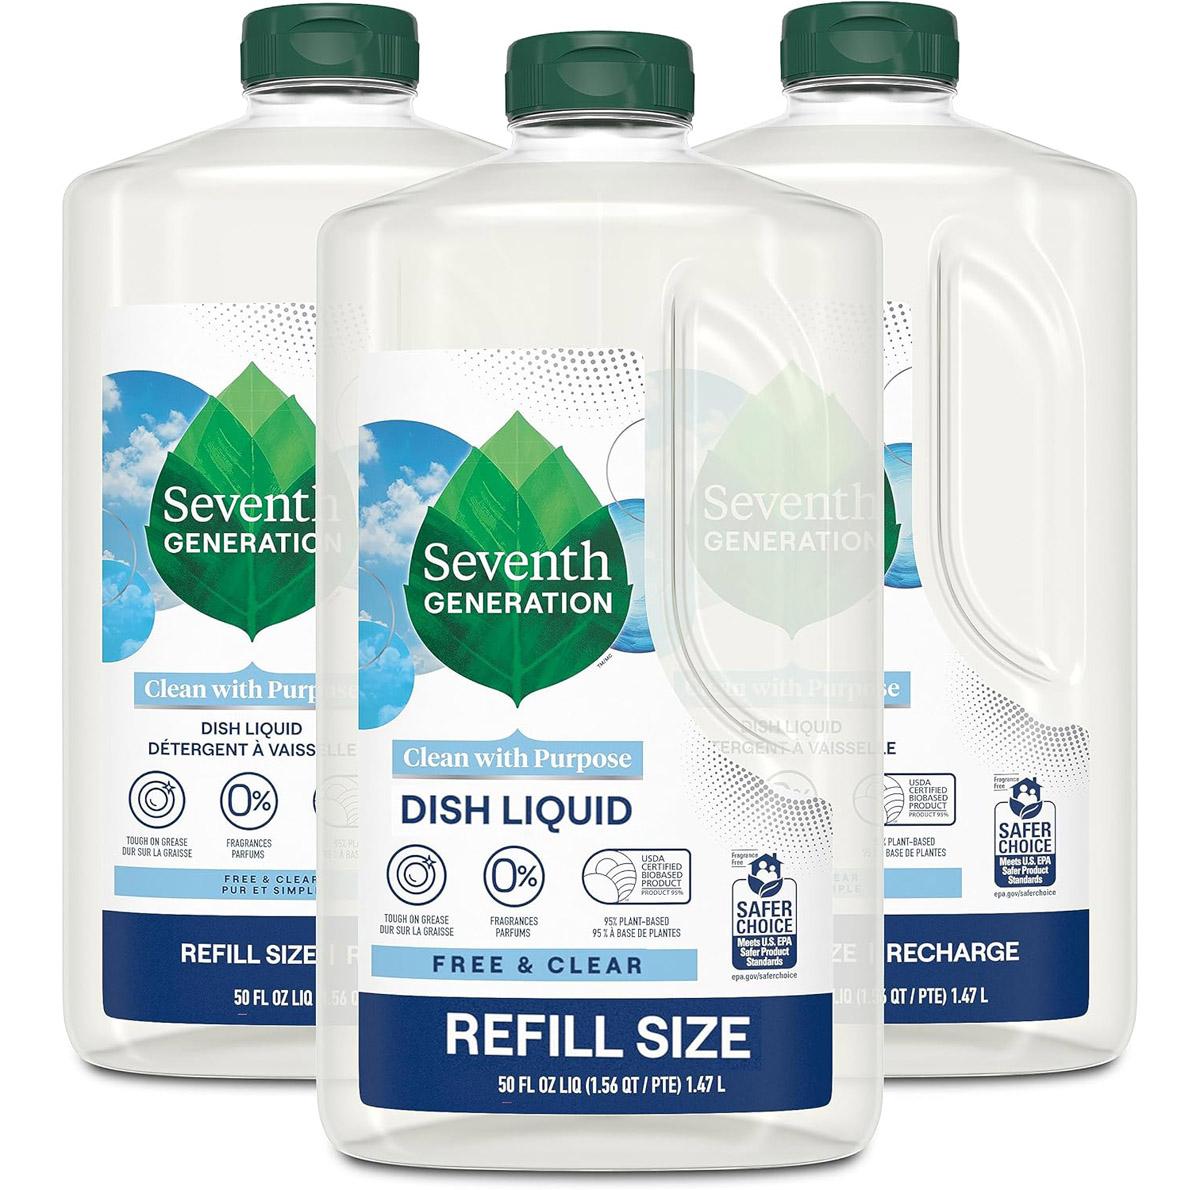 Seventh Generation Hand Dish Wash Refill 3 Pack for $17.07 Shipped